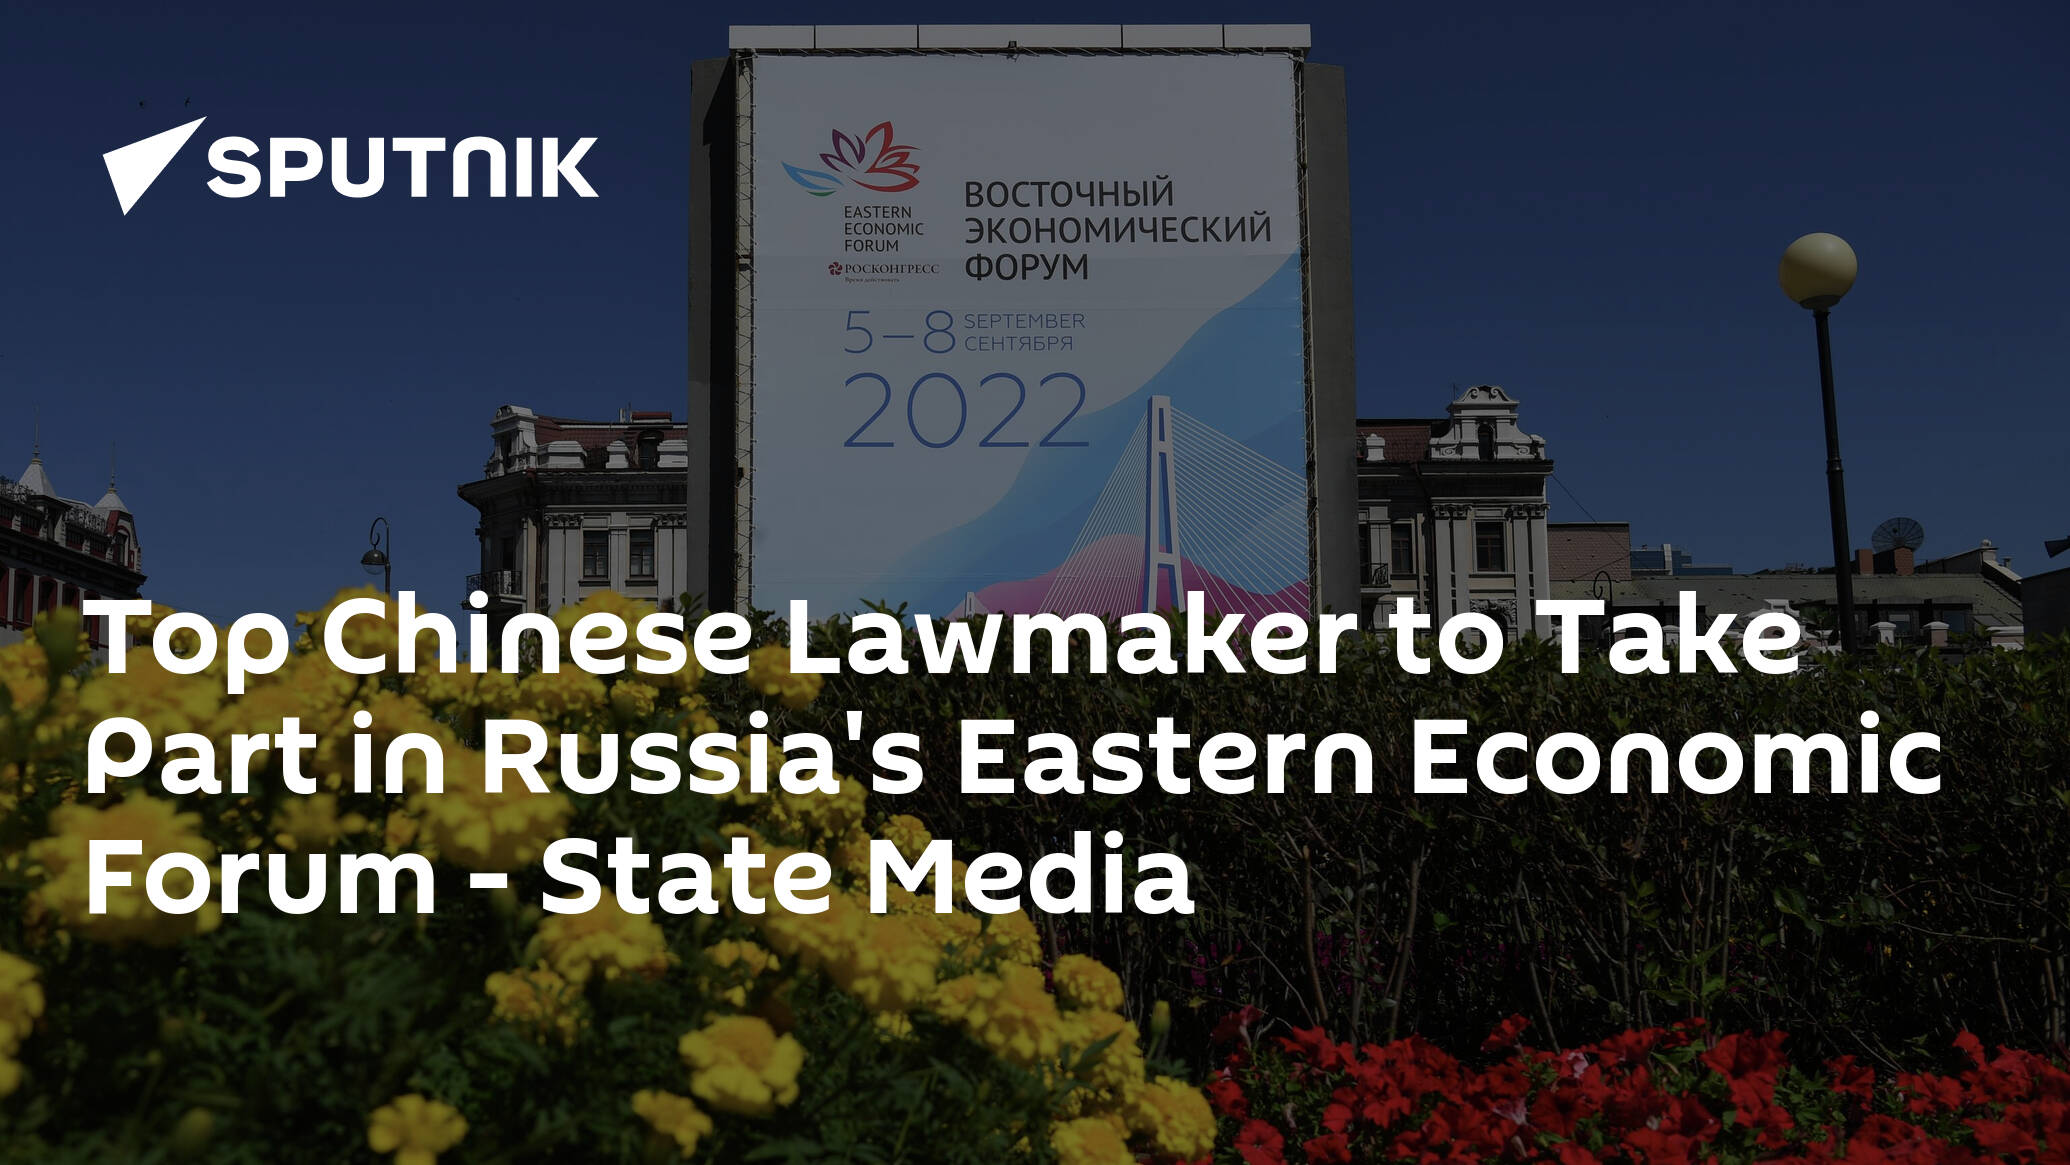 2. Top Chinese Lawmaker to Take Part in Russia's Eastern Economic Foru...